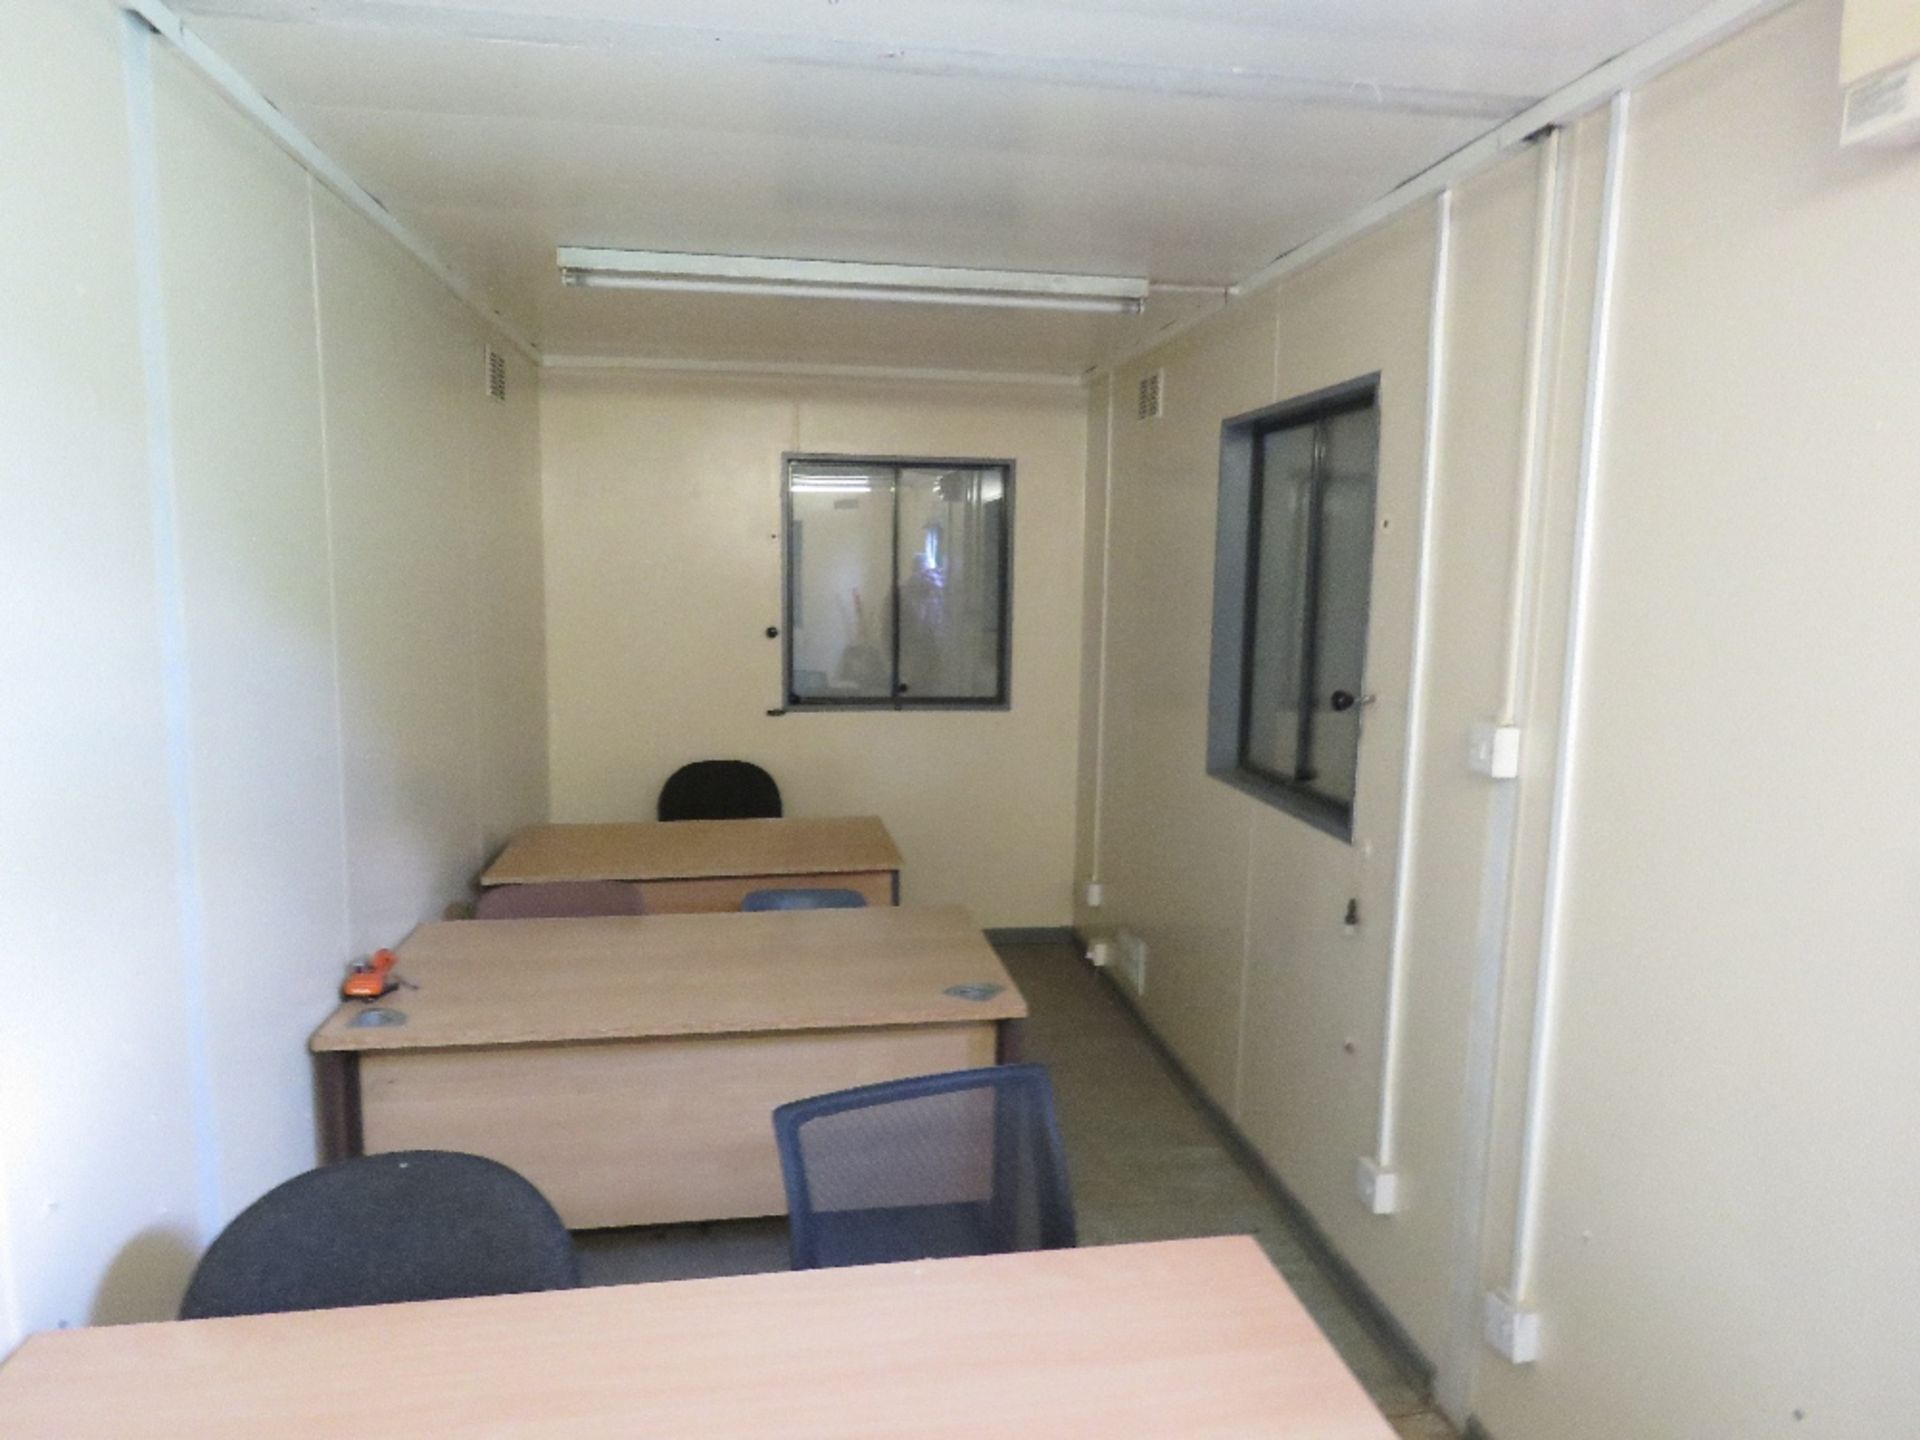 PORTABLE SITE OFFICE 32FT X 10FT APPROX WITH CENTRAL CORRIDOR AND 2 CLASSROOMS/OFFICES AS SHOWN.. IN - Image 4 of 9